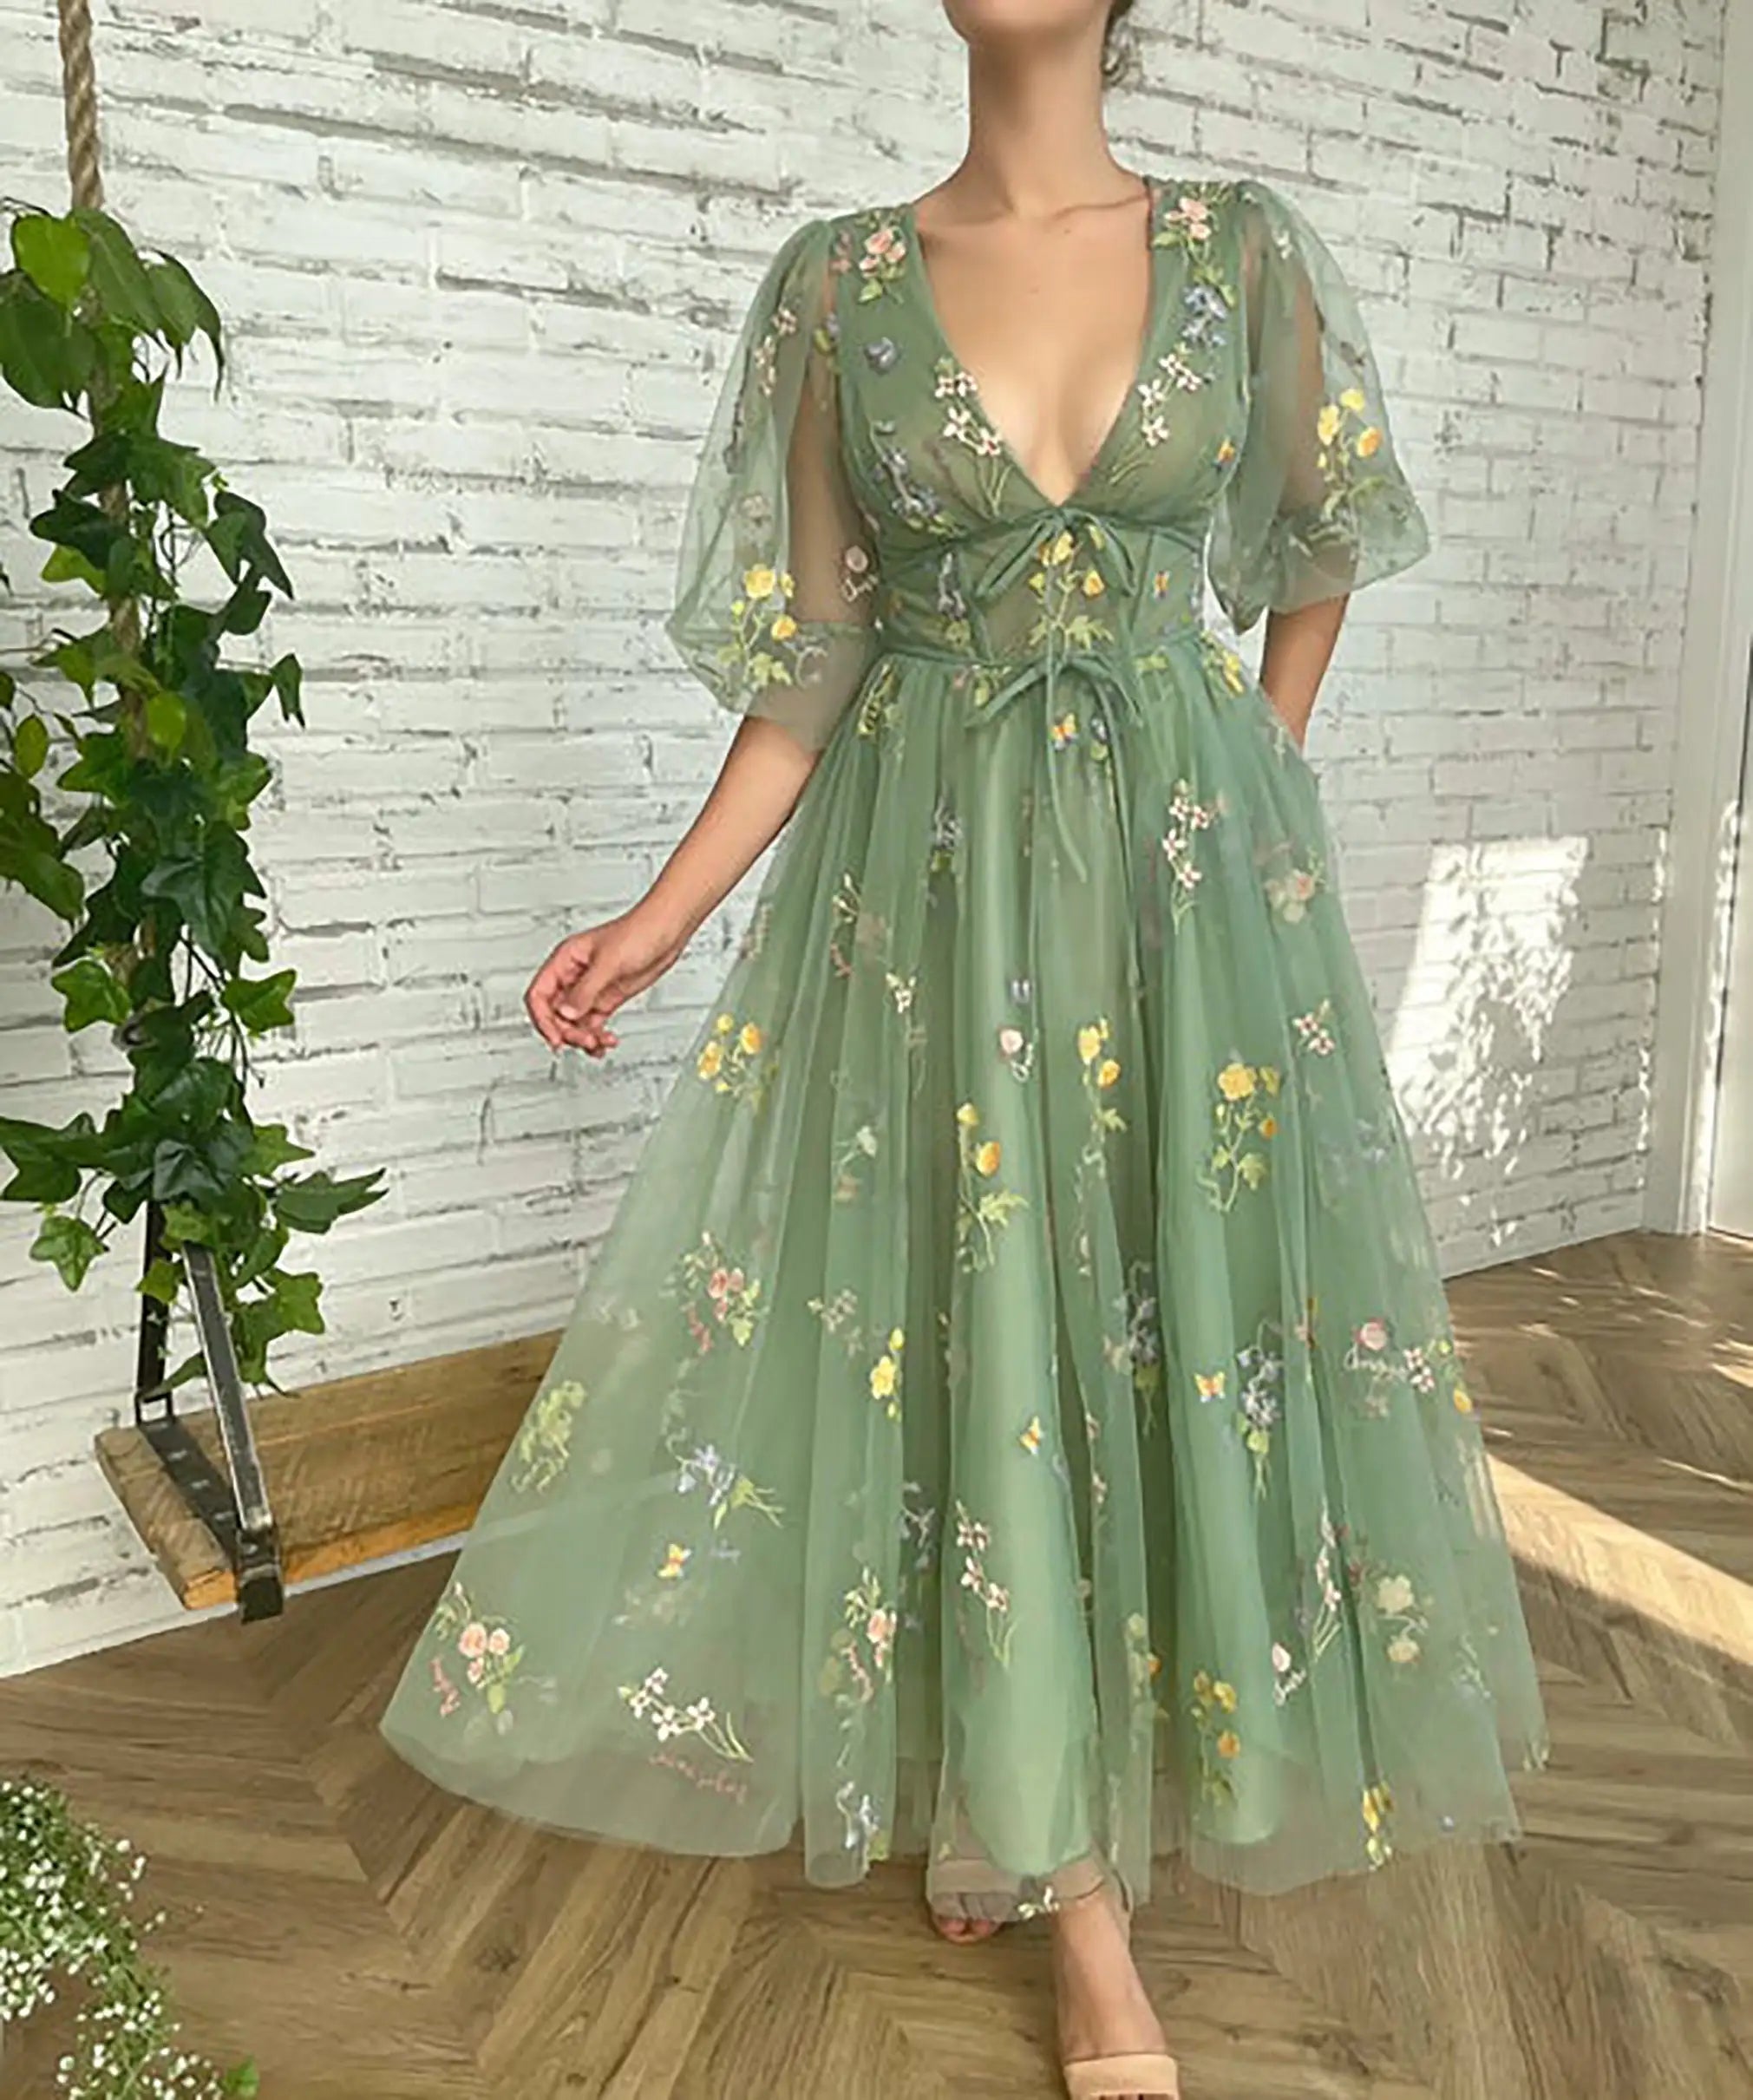 Floral Green Embroidery Prom Dress - Accessory Monk